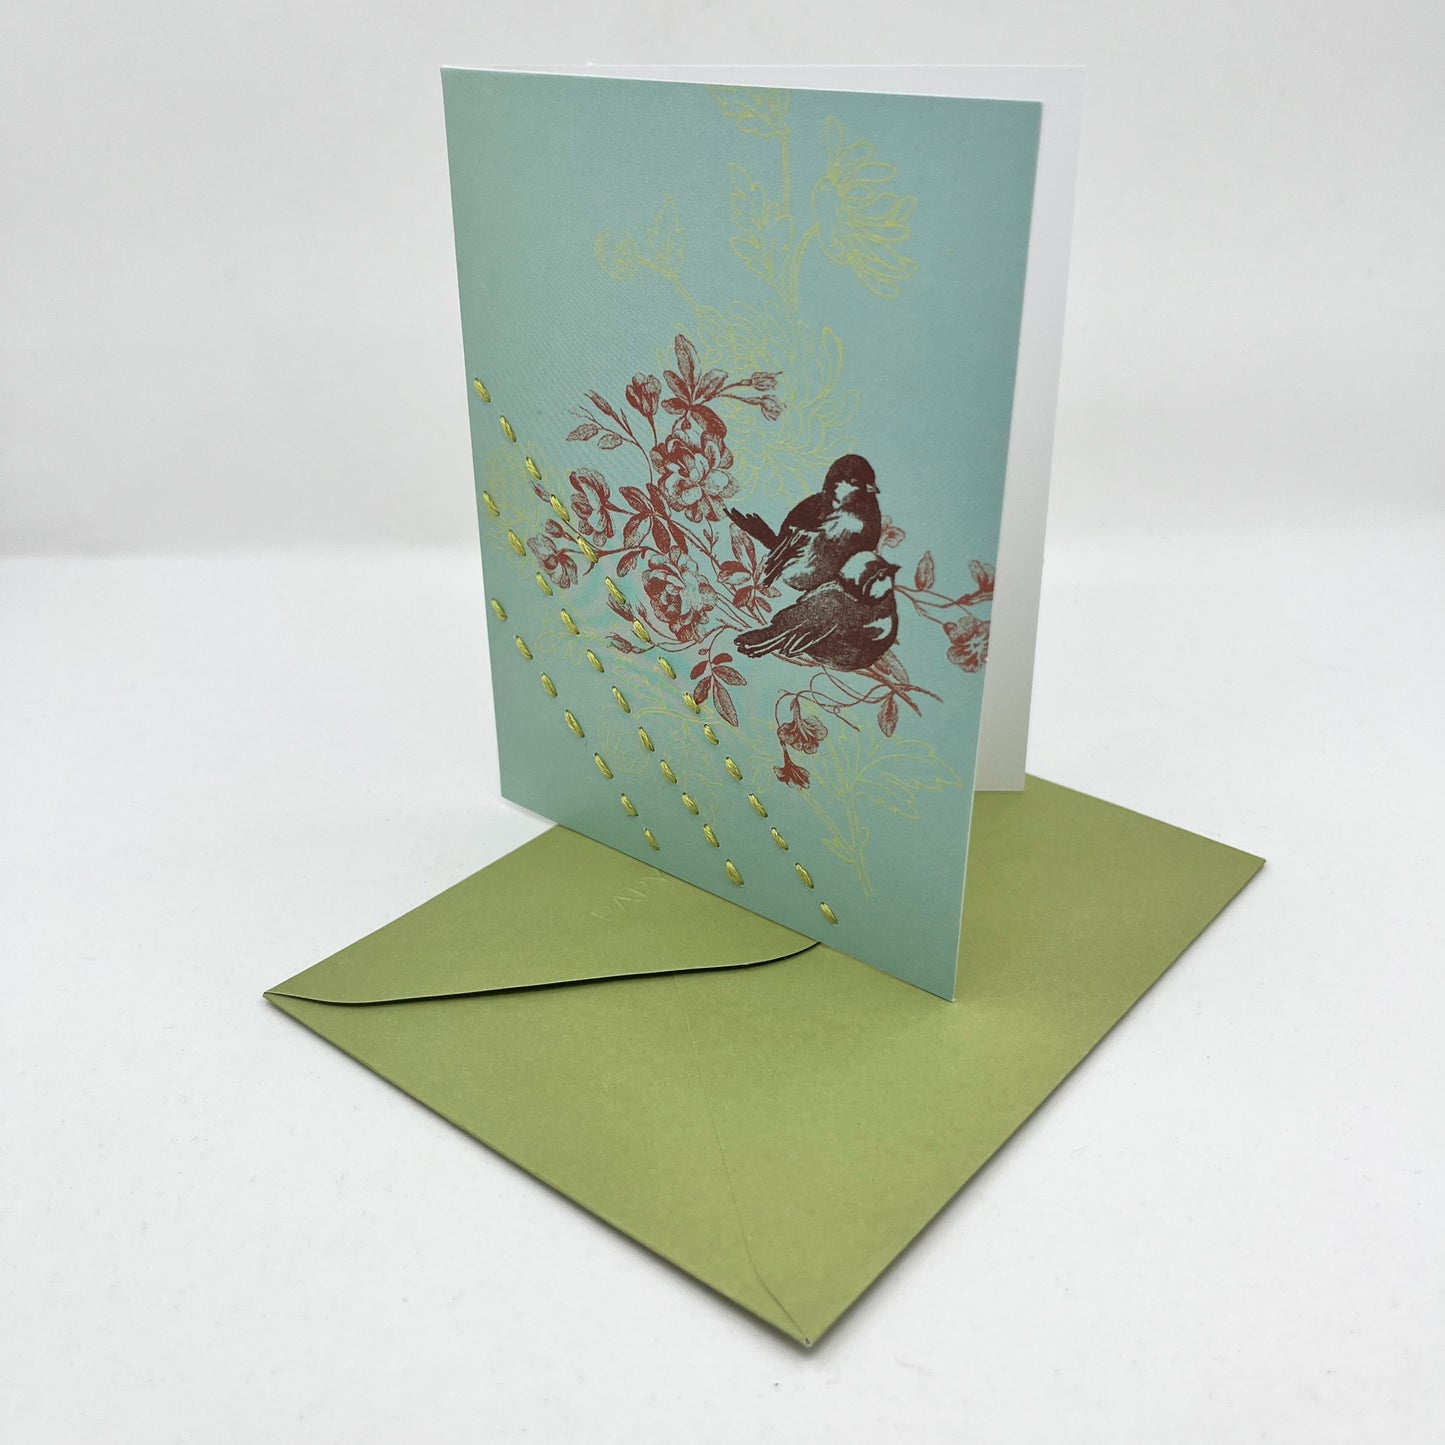 a robin's egg blue greeting card standing upright on a green envelope with a sparrow and flowers printed on it in reds and chartreuse, hand stitched over with 3 rows of running stitches in chartreuse, diagonally over the bottom left corner